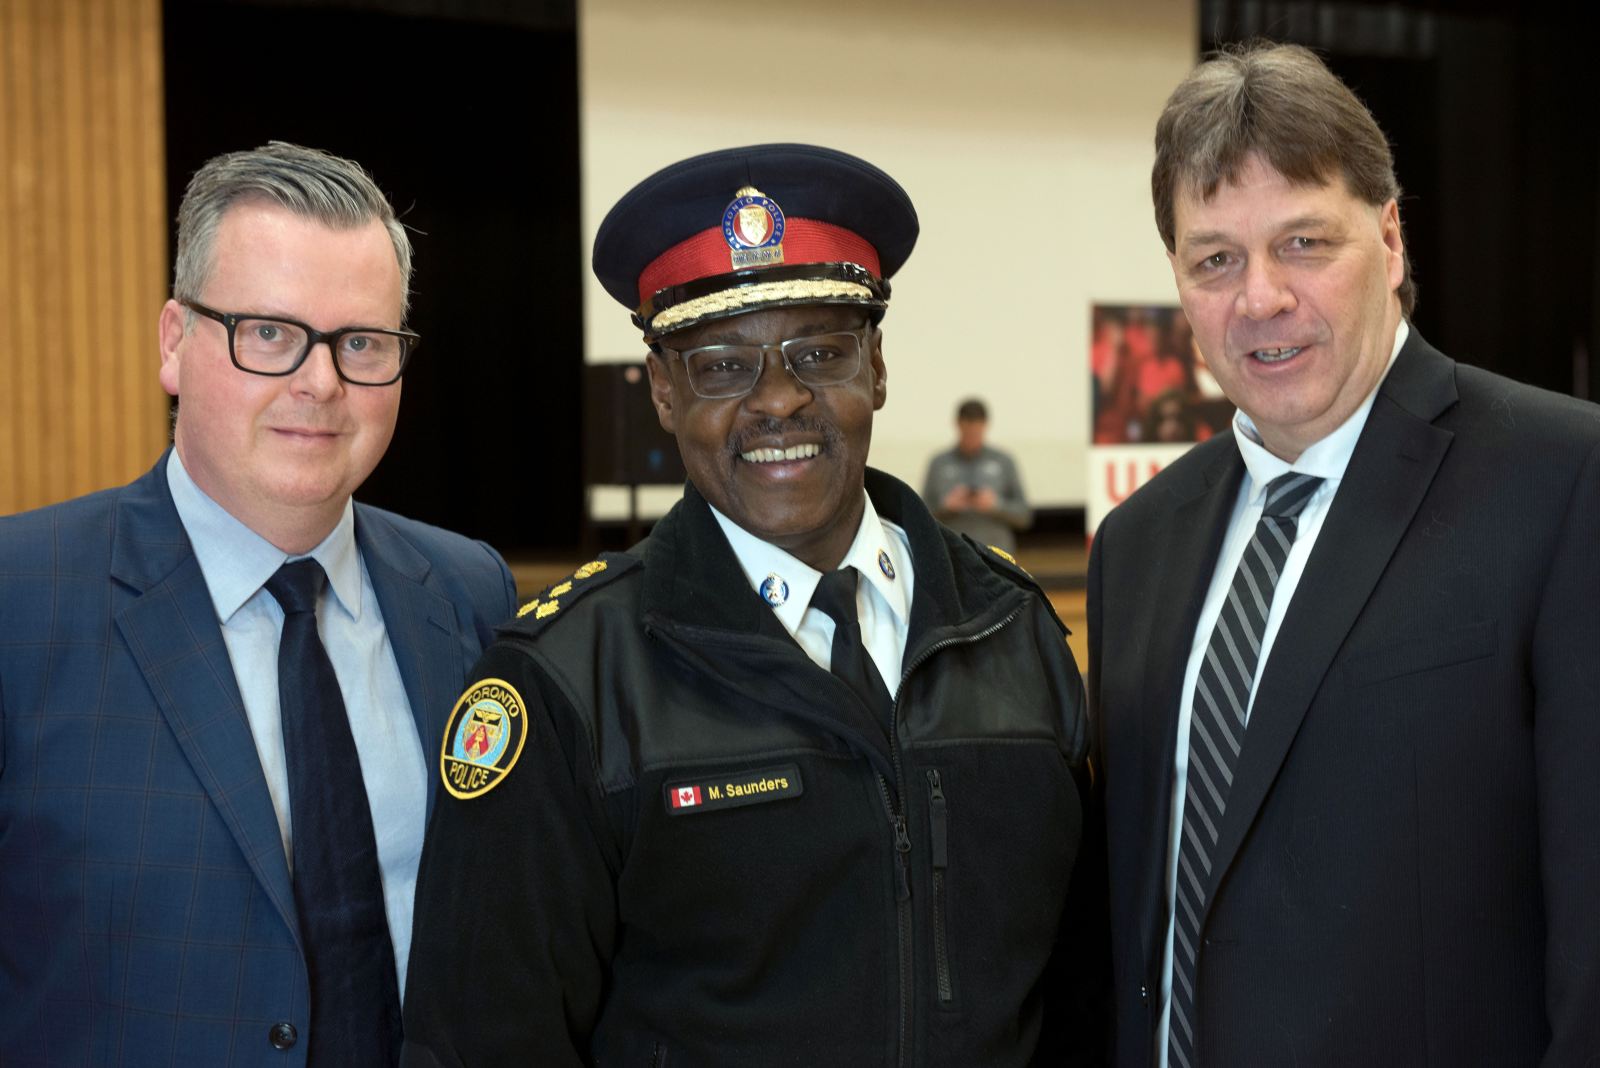 From left to right (TDSB Executive Superintendent Brendan Browne, Toronto Police Chief Mark Saunders, Trustee MacLean)